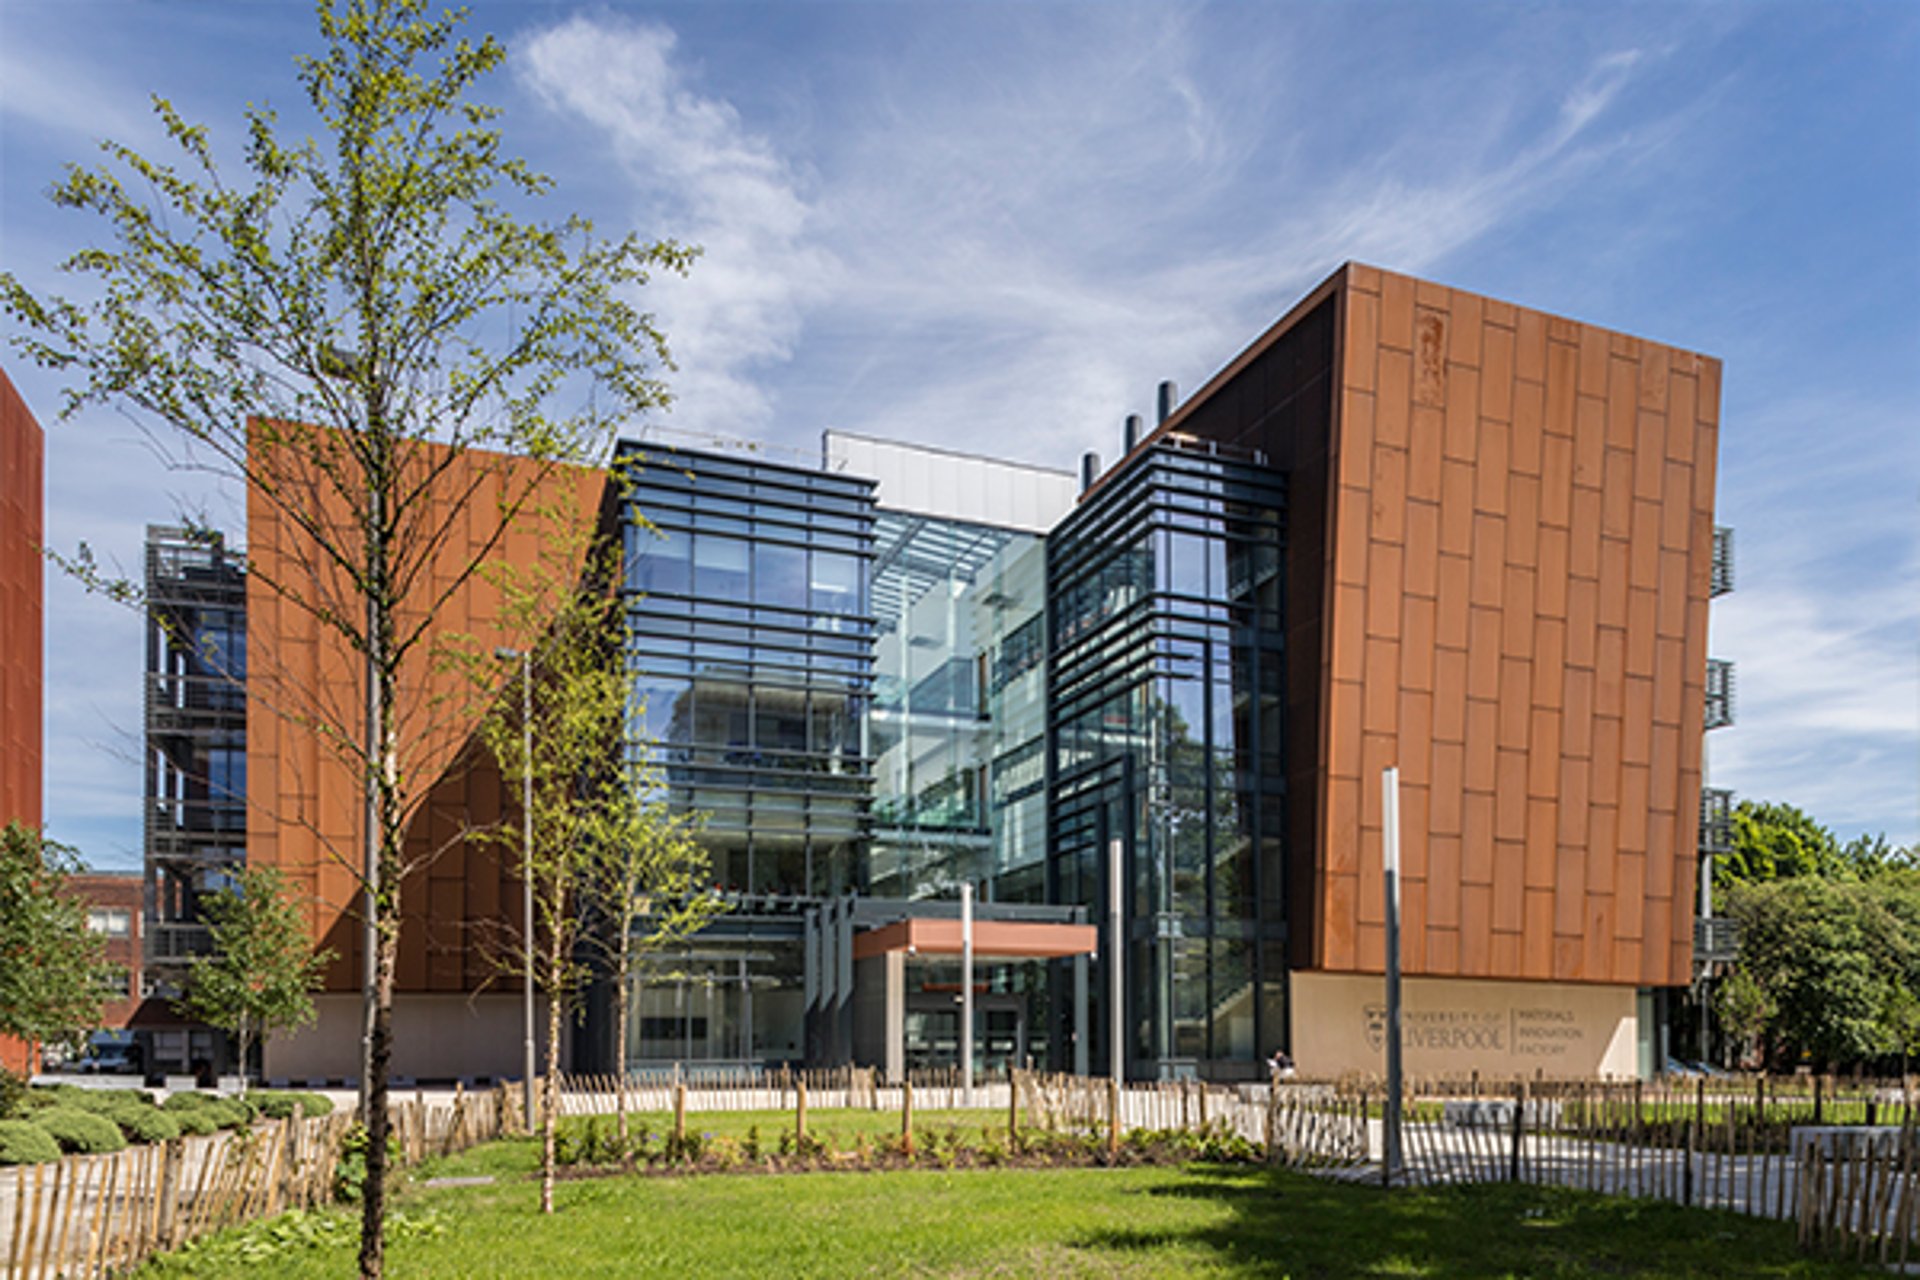 A large modern university MIF building in Liverpool with glass frontage and rusted panels in a grid pattern against a blue sky with light clouds